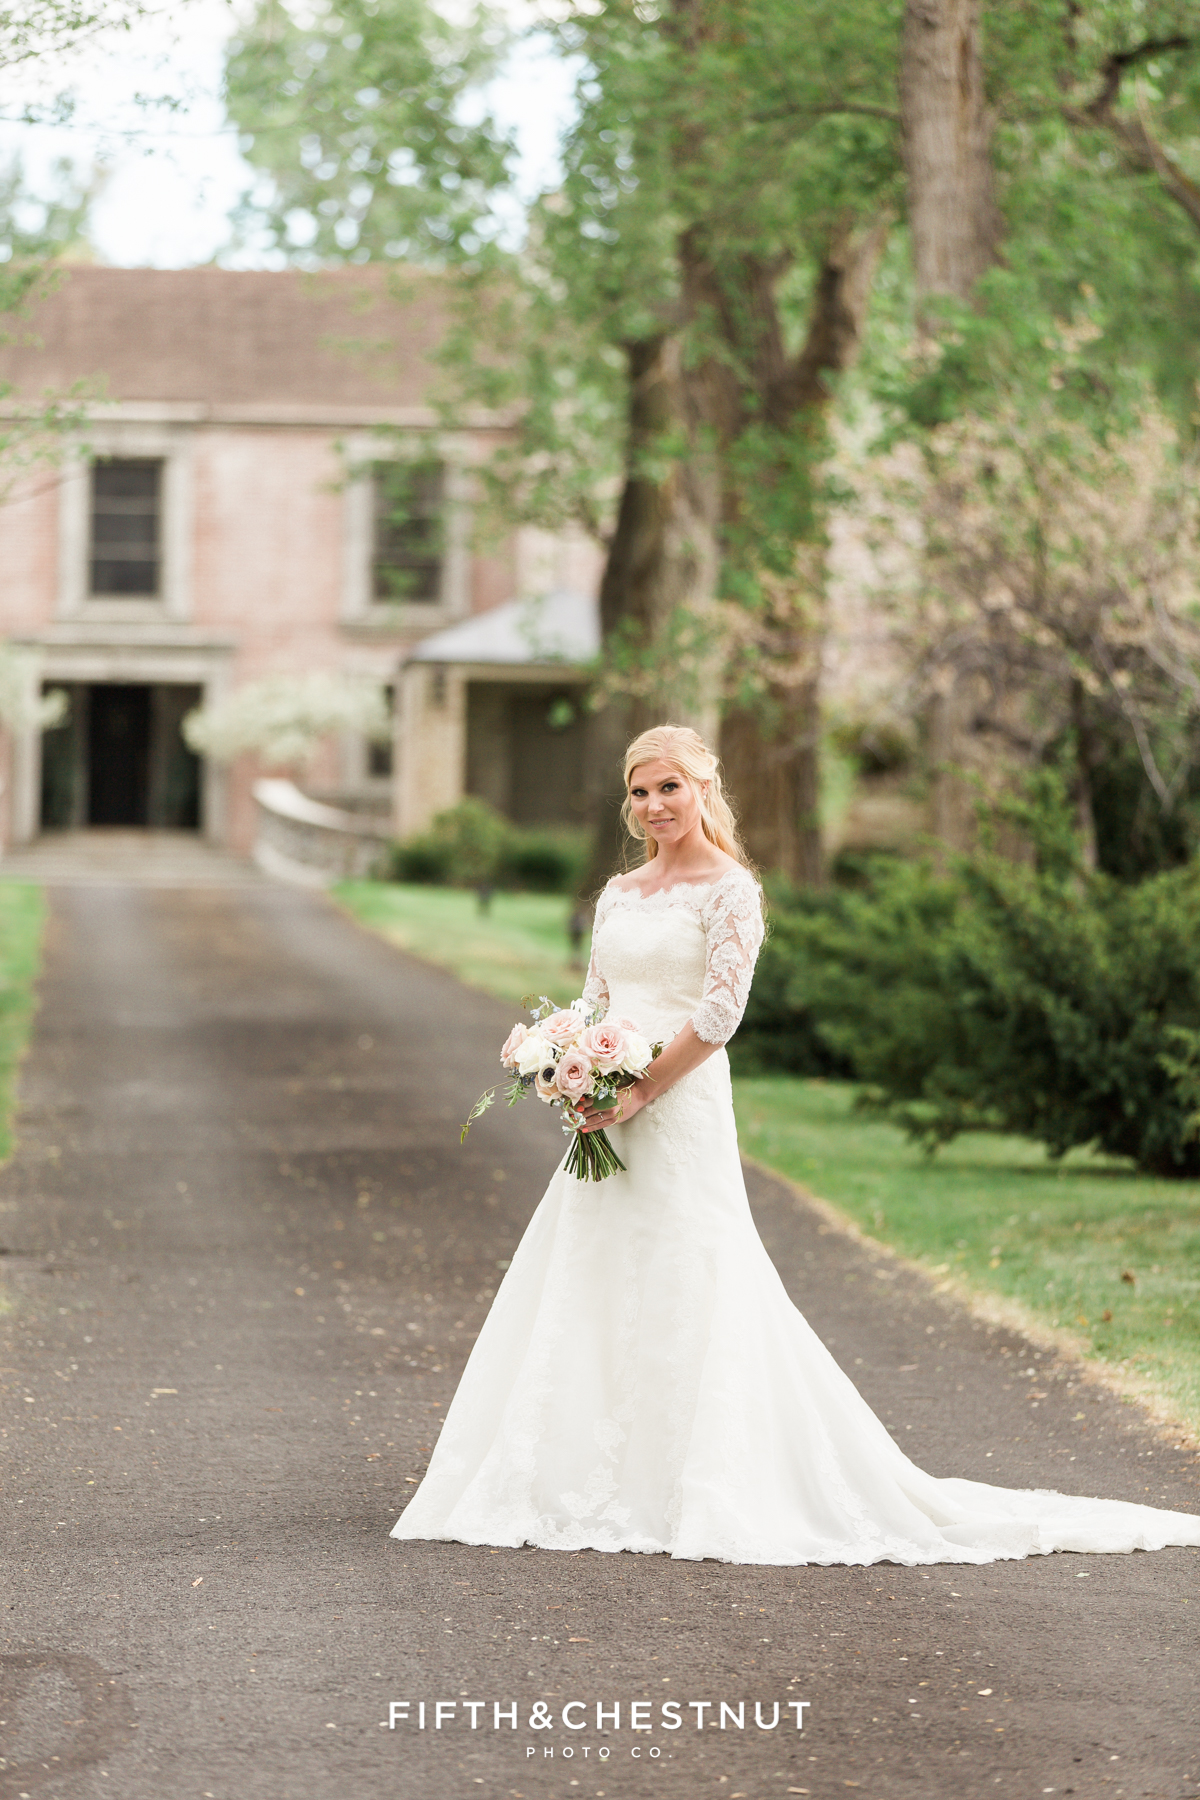 Happy bride in lace dress standing in an oak-lined pathway leading to a stone and brick private estate